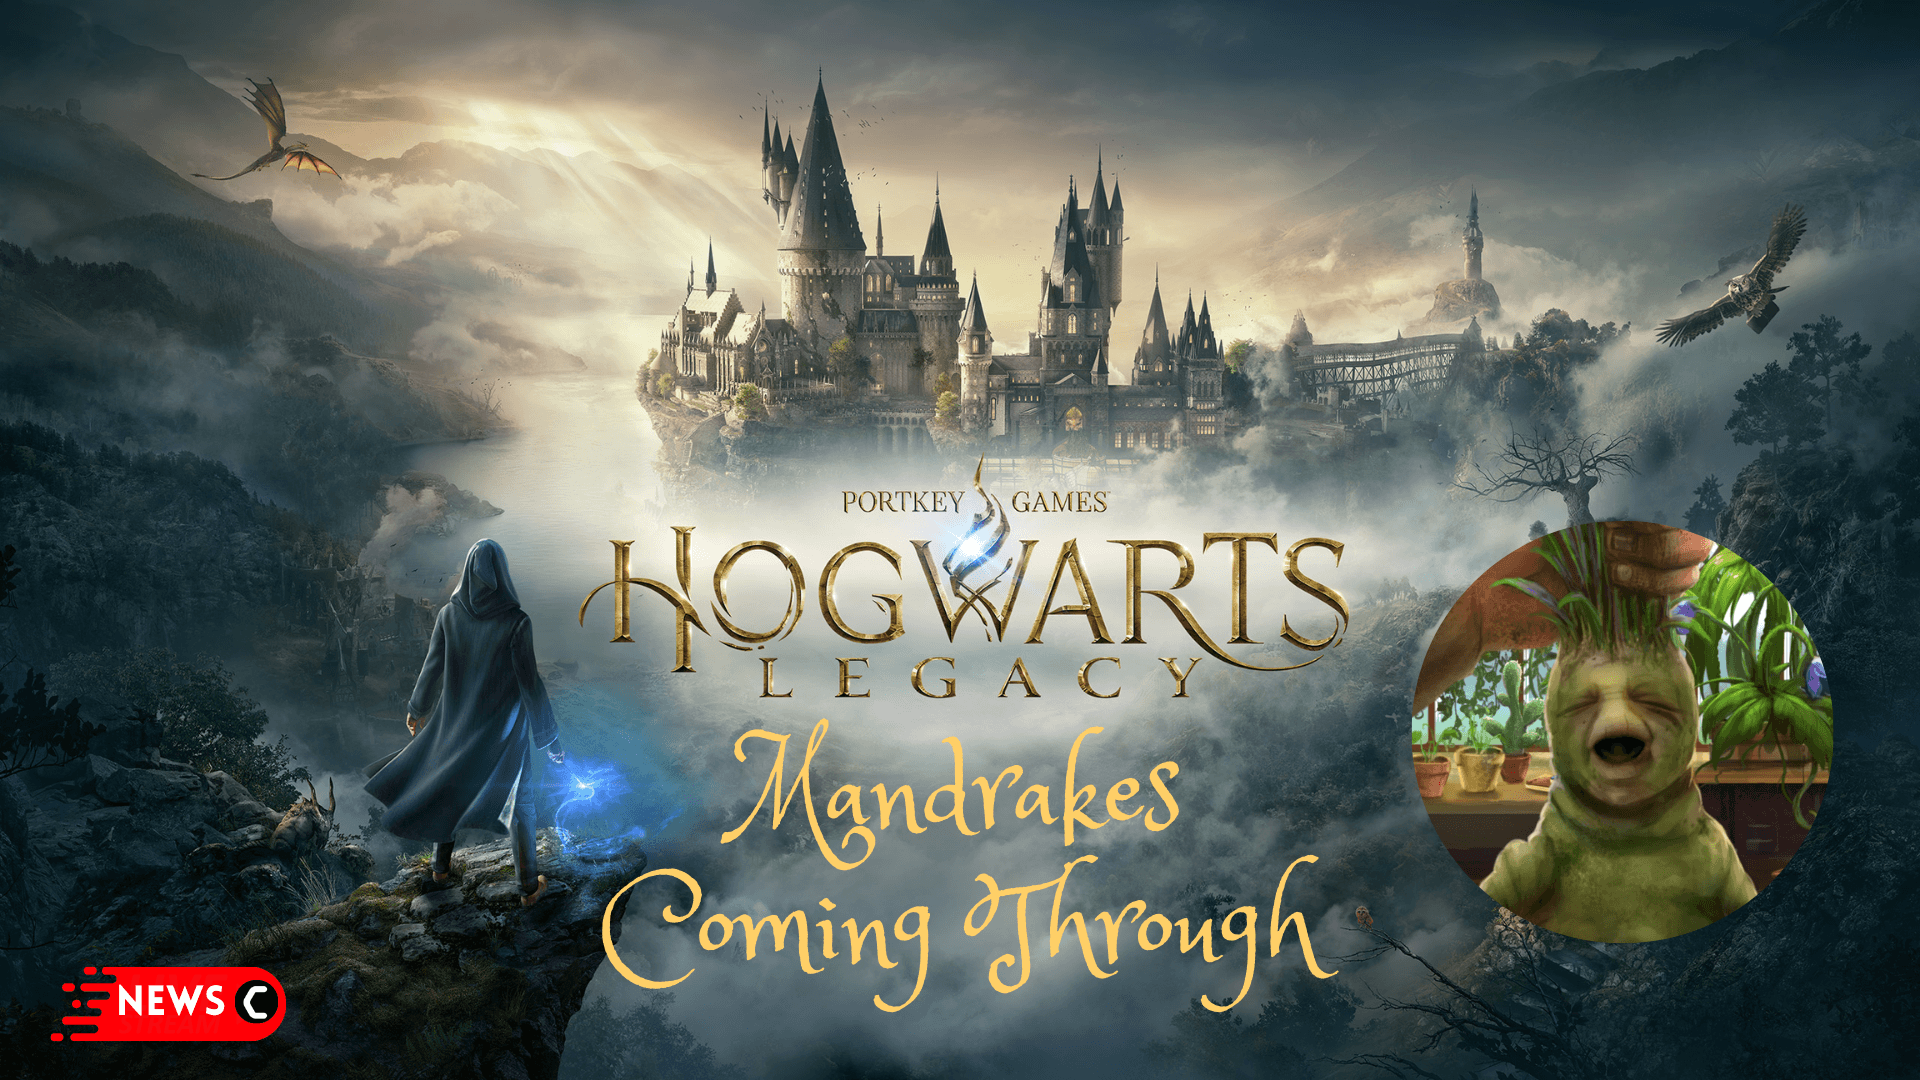 Players can now use mandrakes as a weapon in Hogwarts Legacy